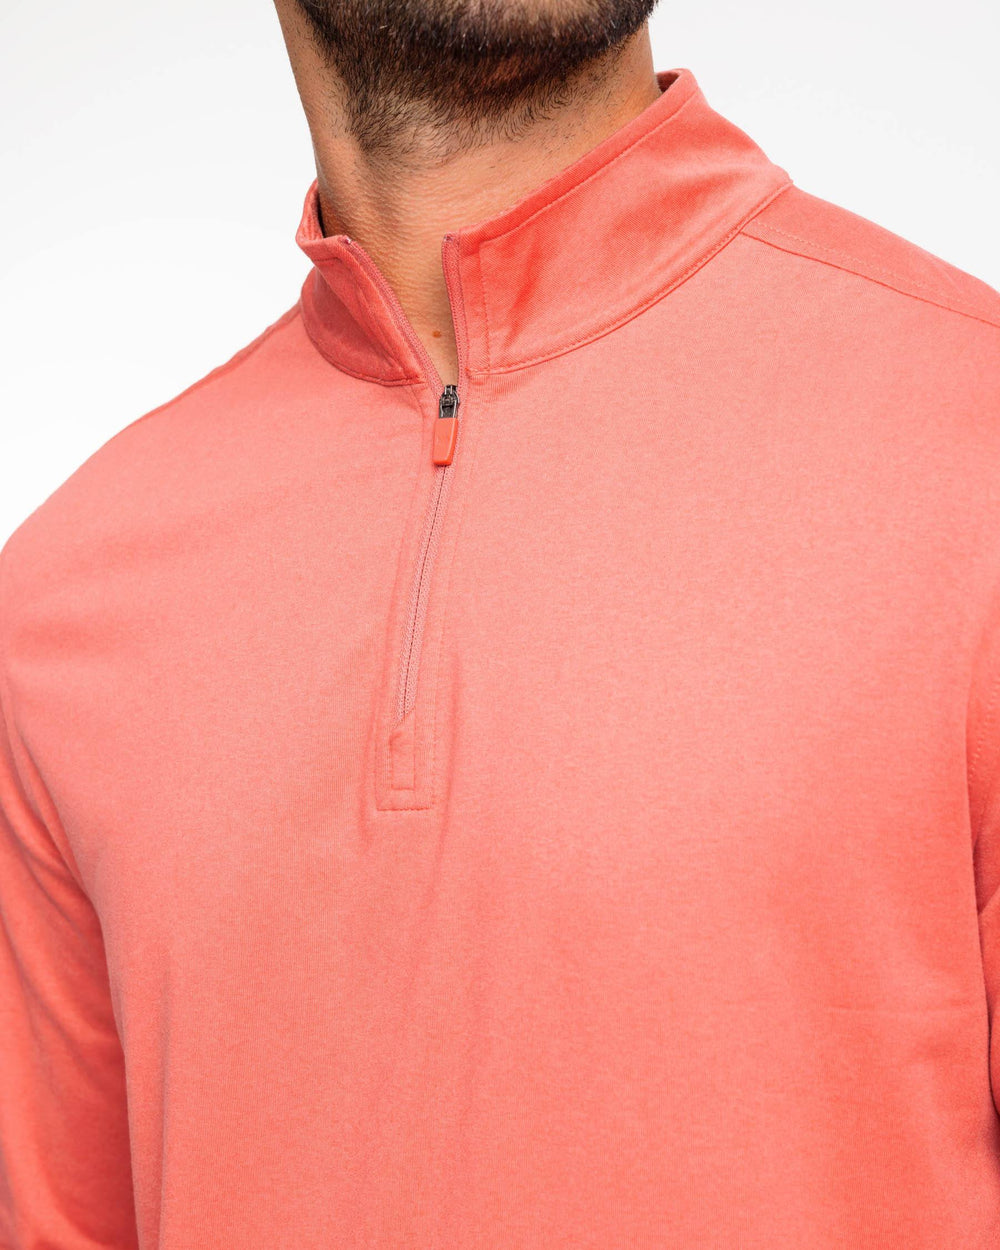 The detail view of the Backbarrier Heather Performance Quarter Zip Pullover by Southern Tide - Heather Mineral Red